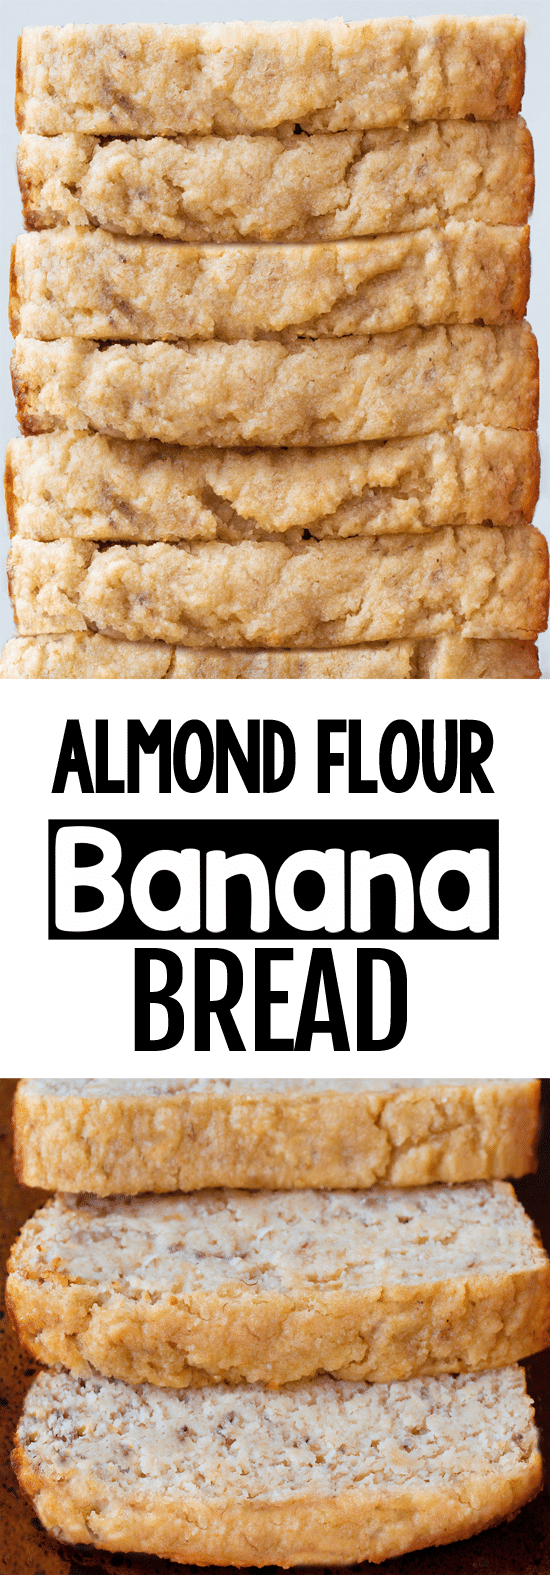 How To Make Low Carb Almond Flour Banana Bread